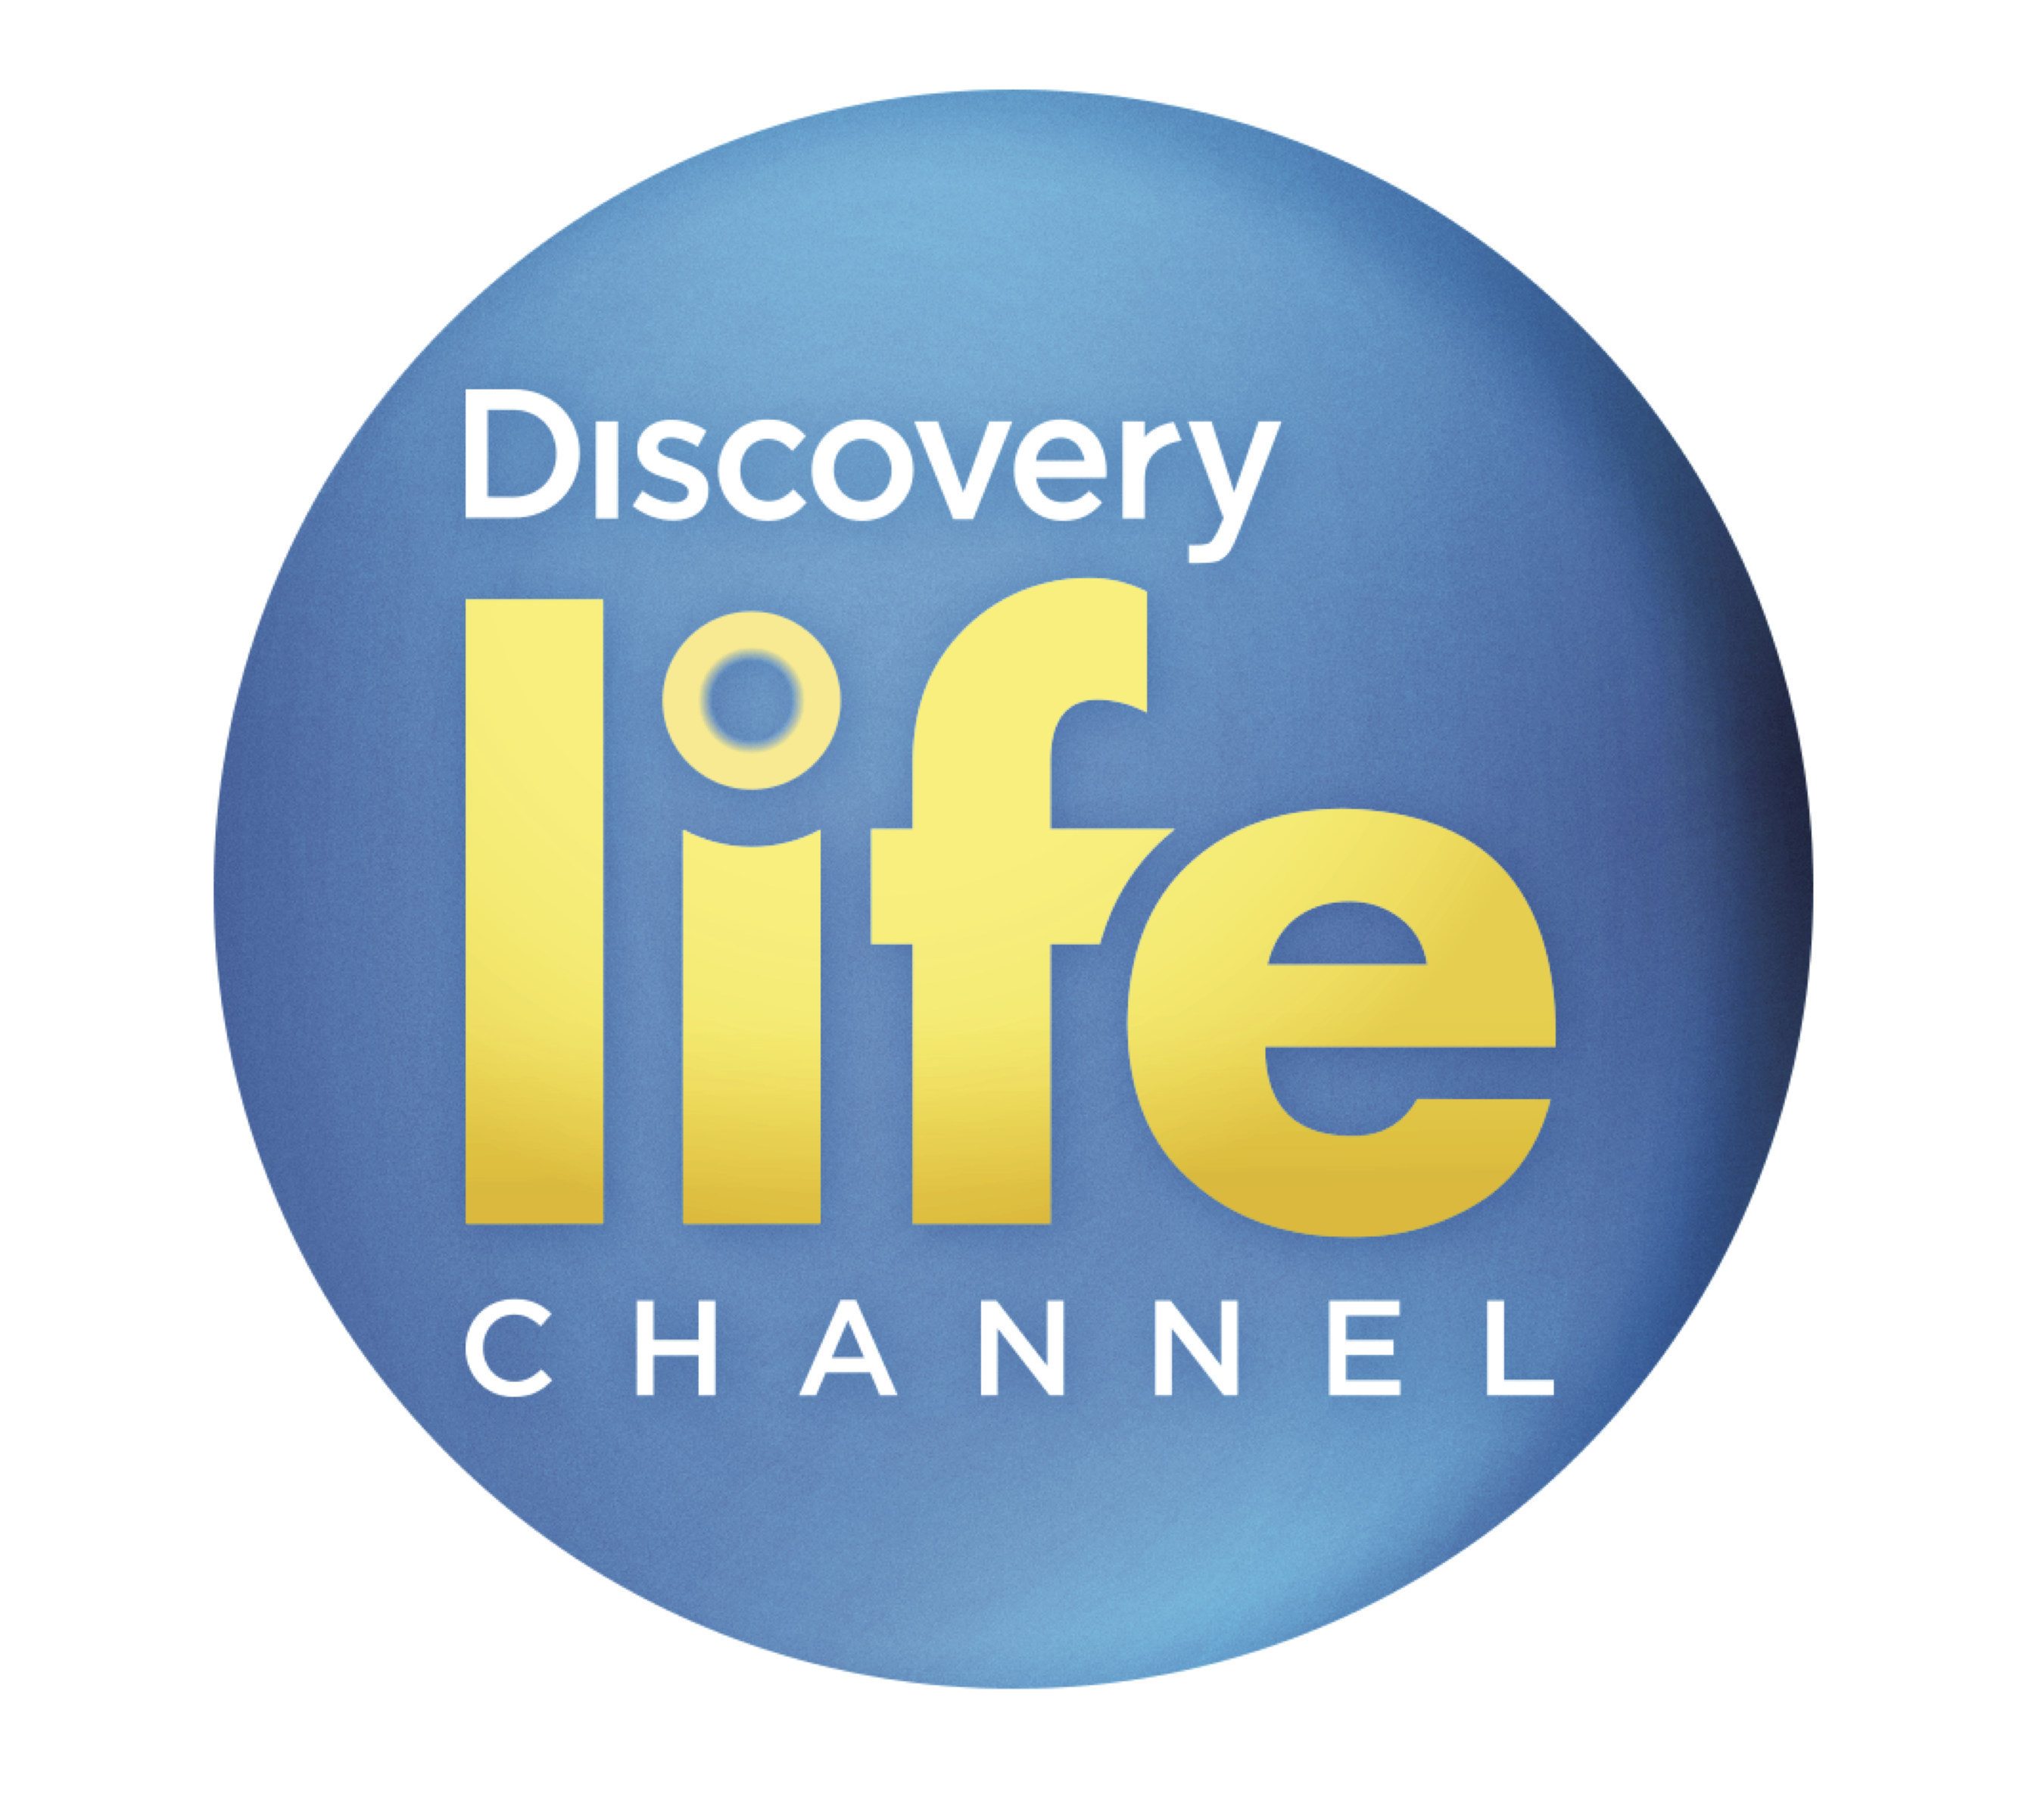 Discovery Life Channel logo